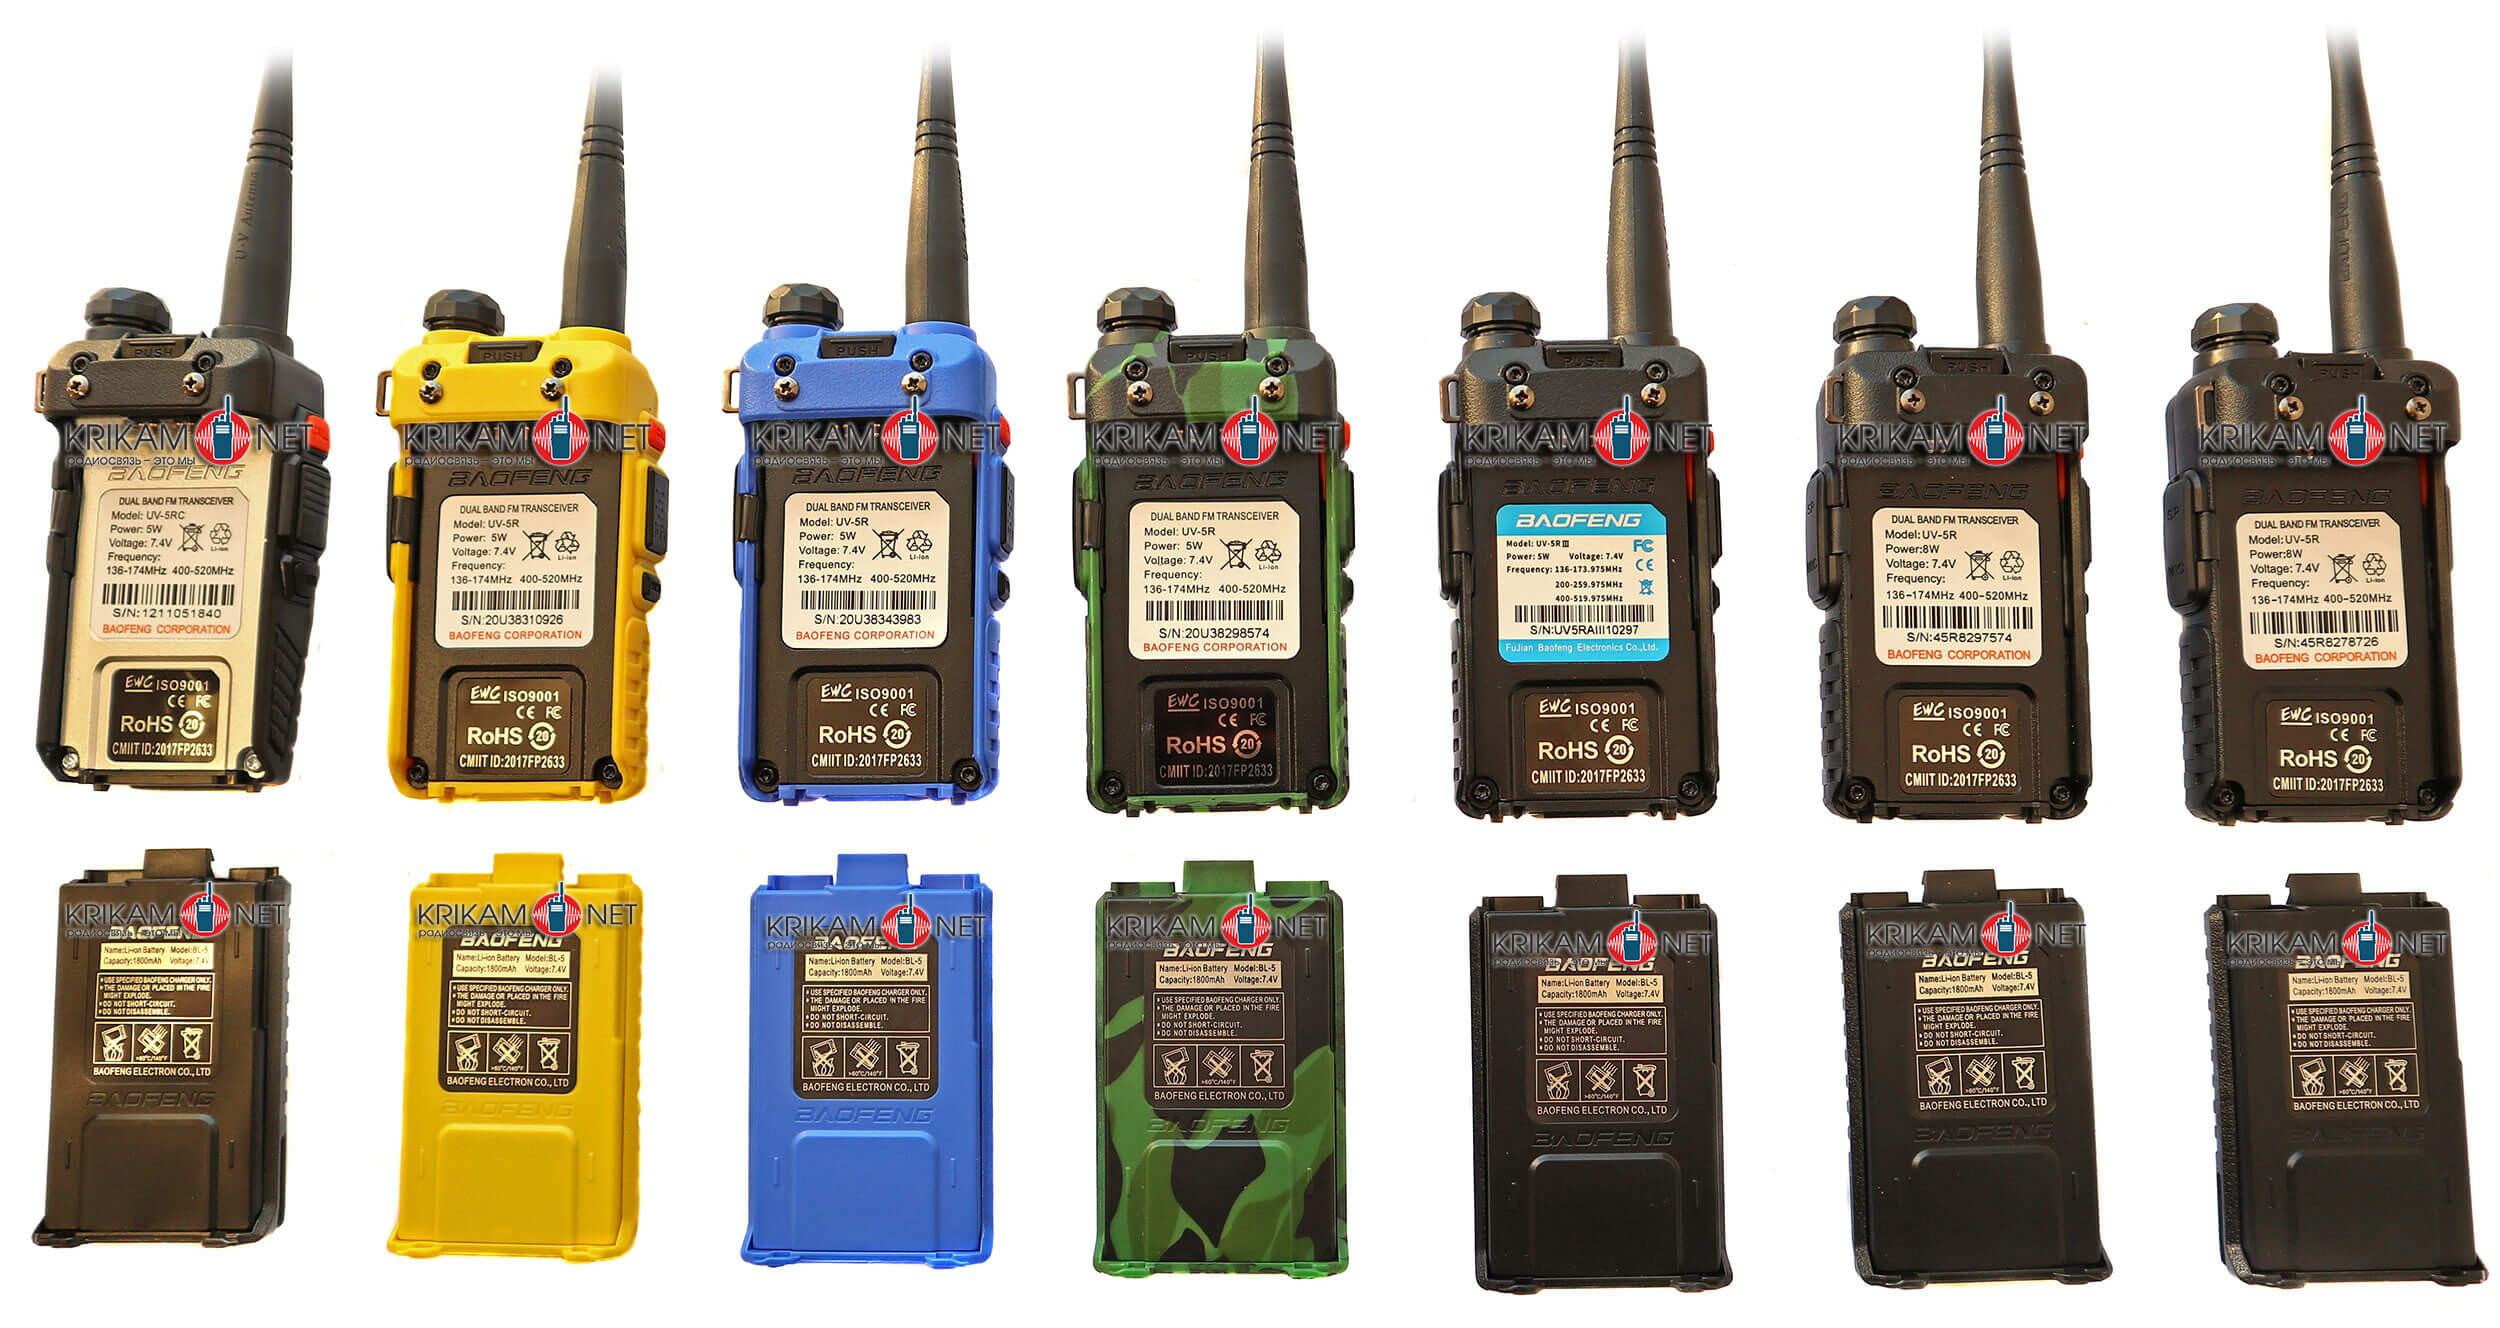 Baofeng UV-5R walkie-talkie review: which one to choose?